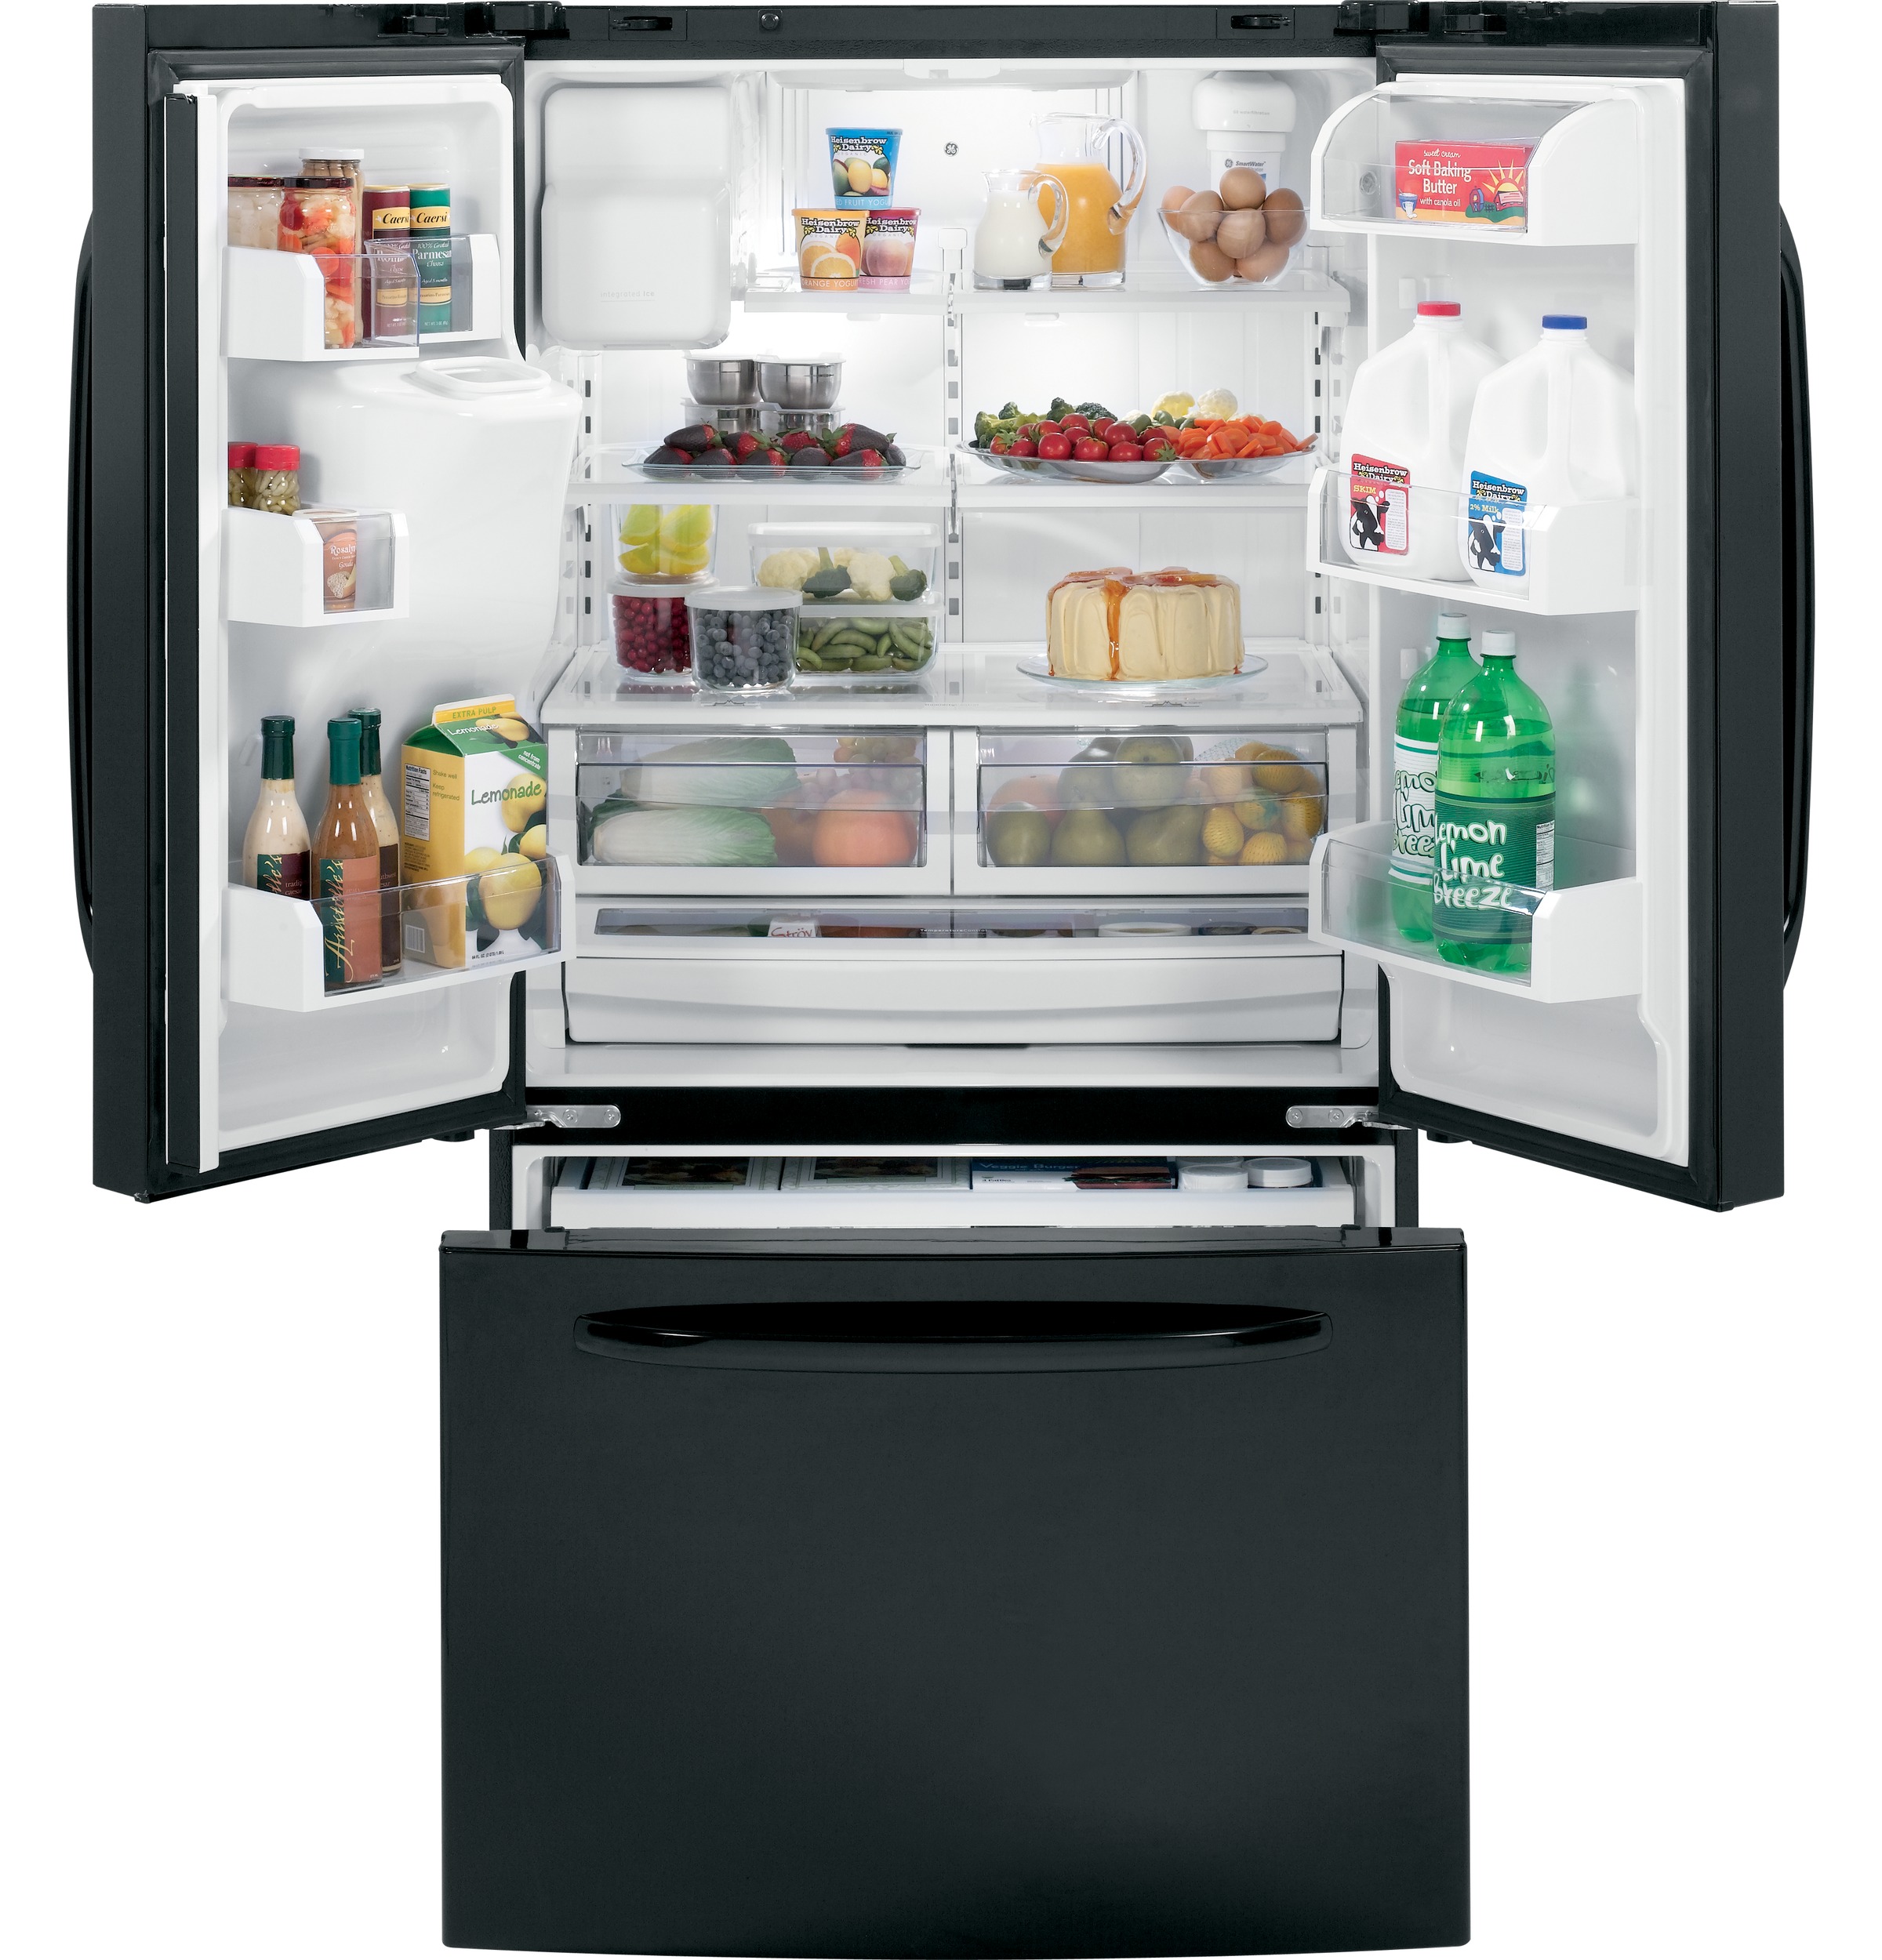 GE® ENERGY STAR® 28.5 Cu. Ft. French-Door Refrigerator with Icemaker